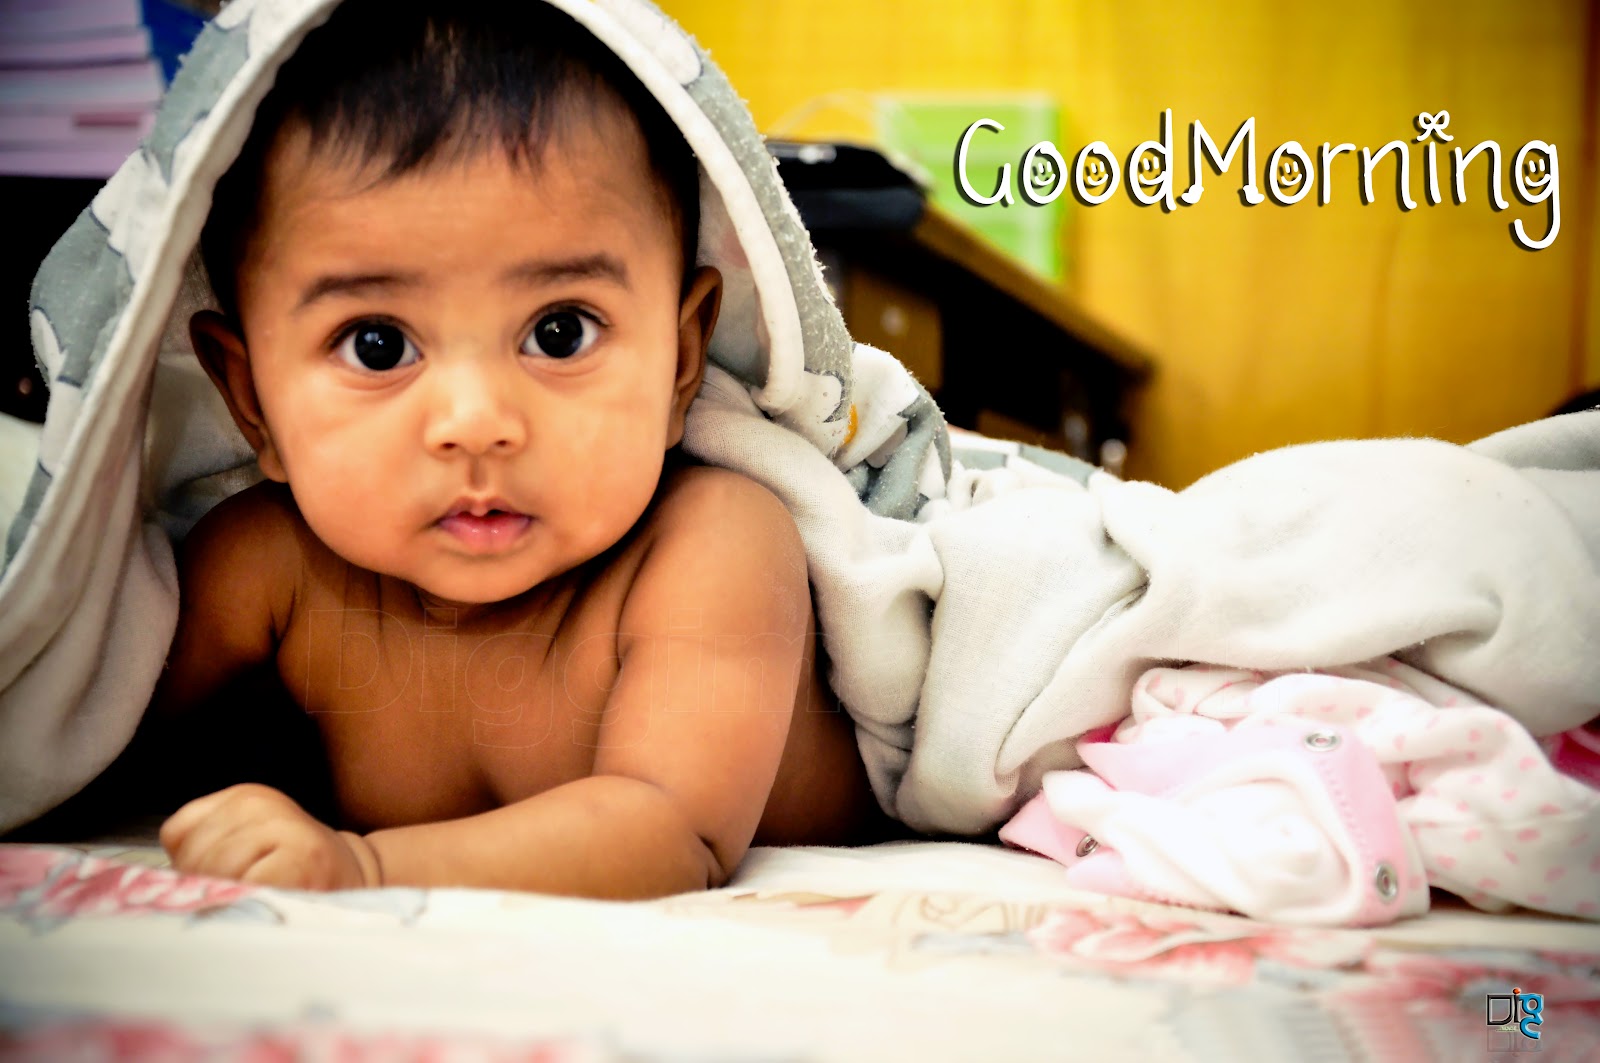 Good Morning Baby Cute Greetings Scraps And Wallpaper D I G